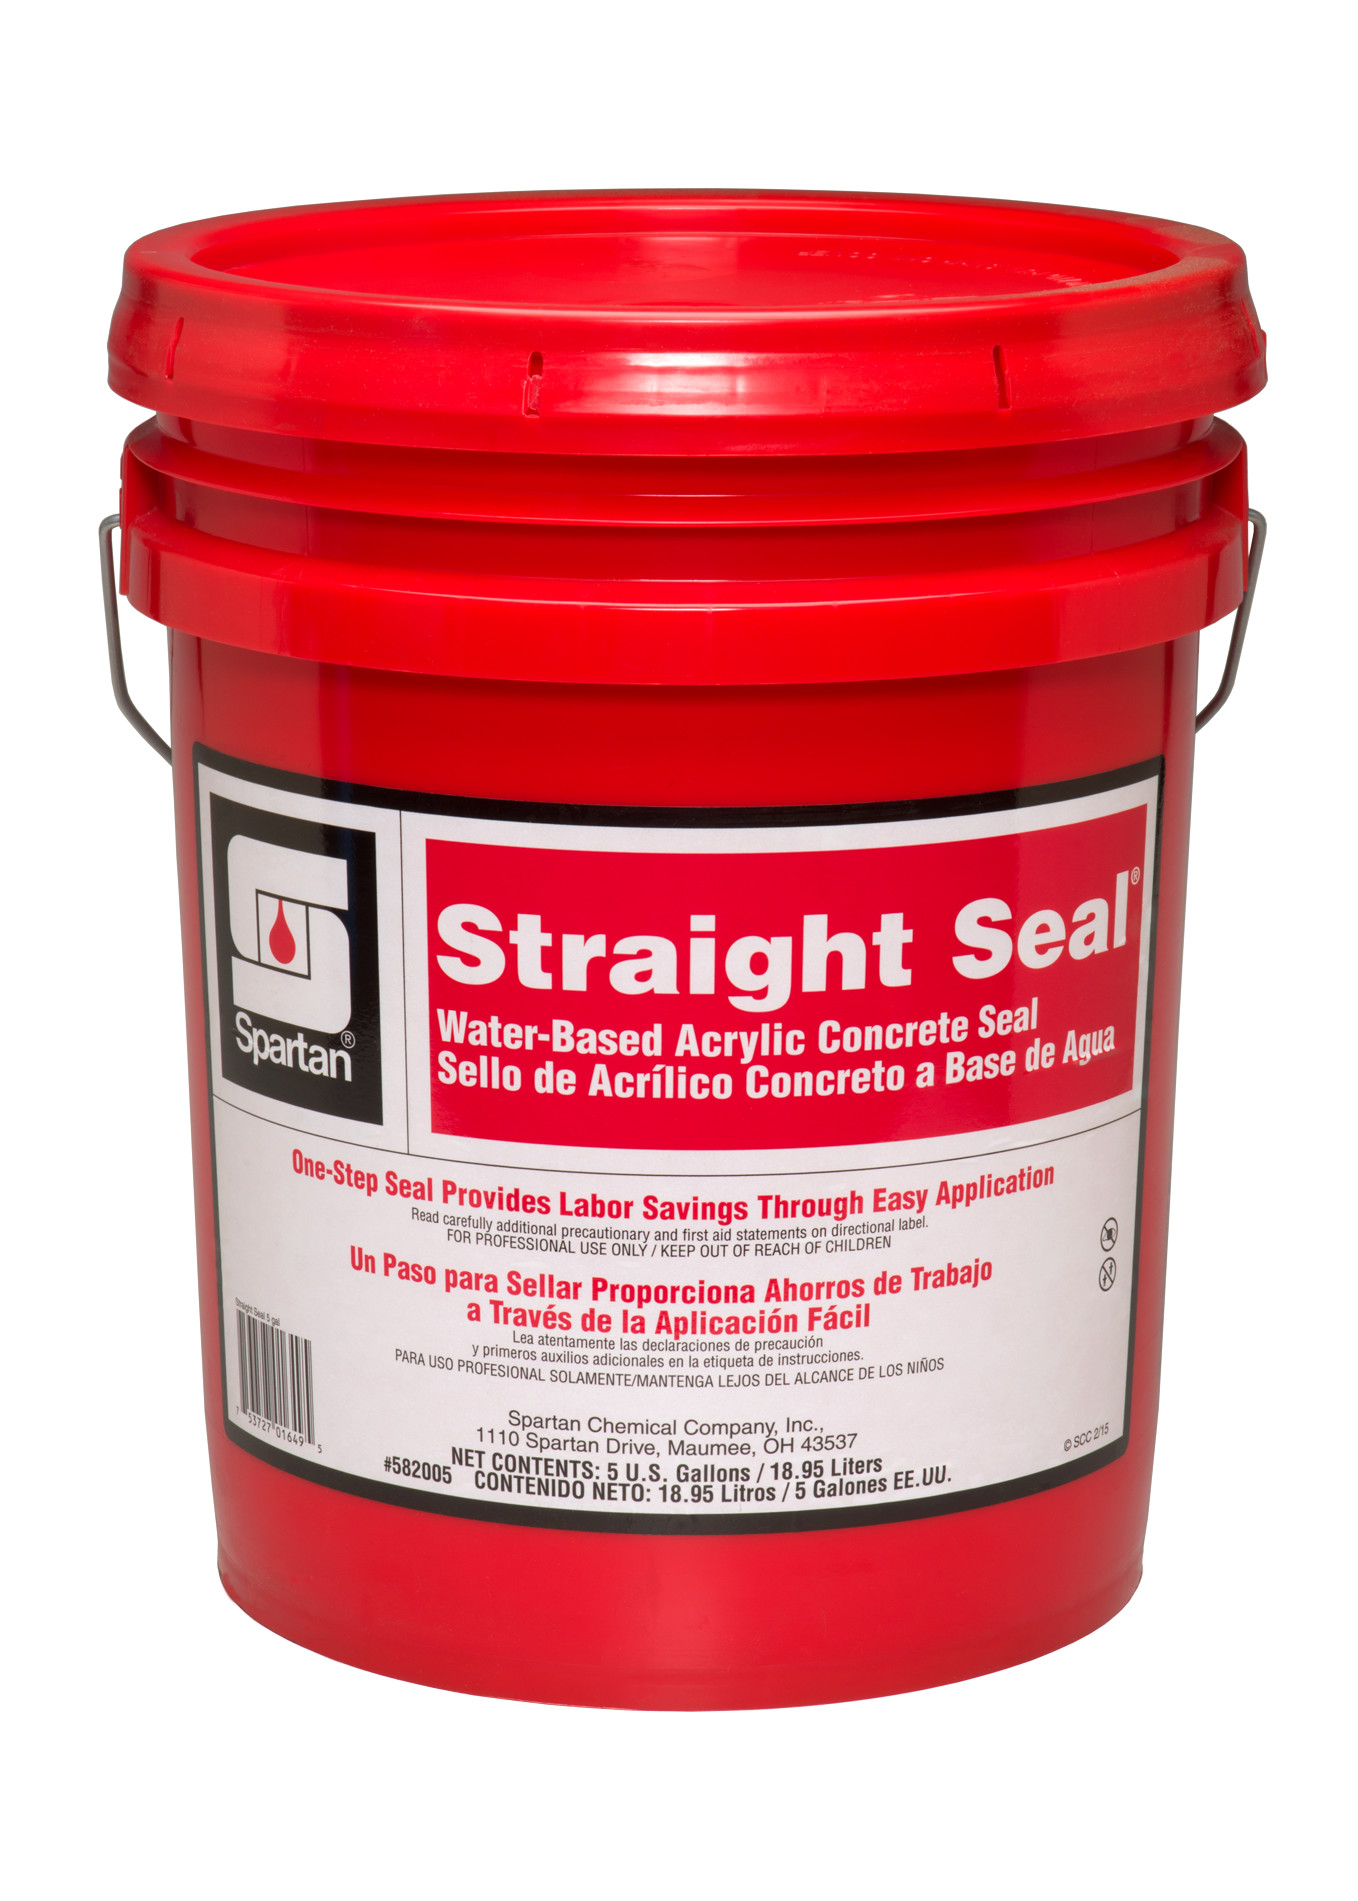 Spartan Chemical Company Straight Seal, 5 GAL PAIL